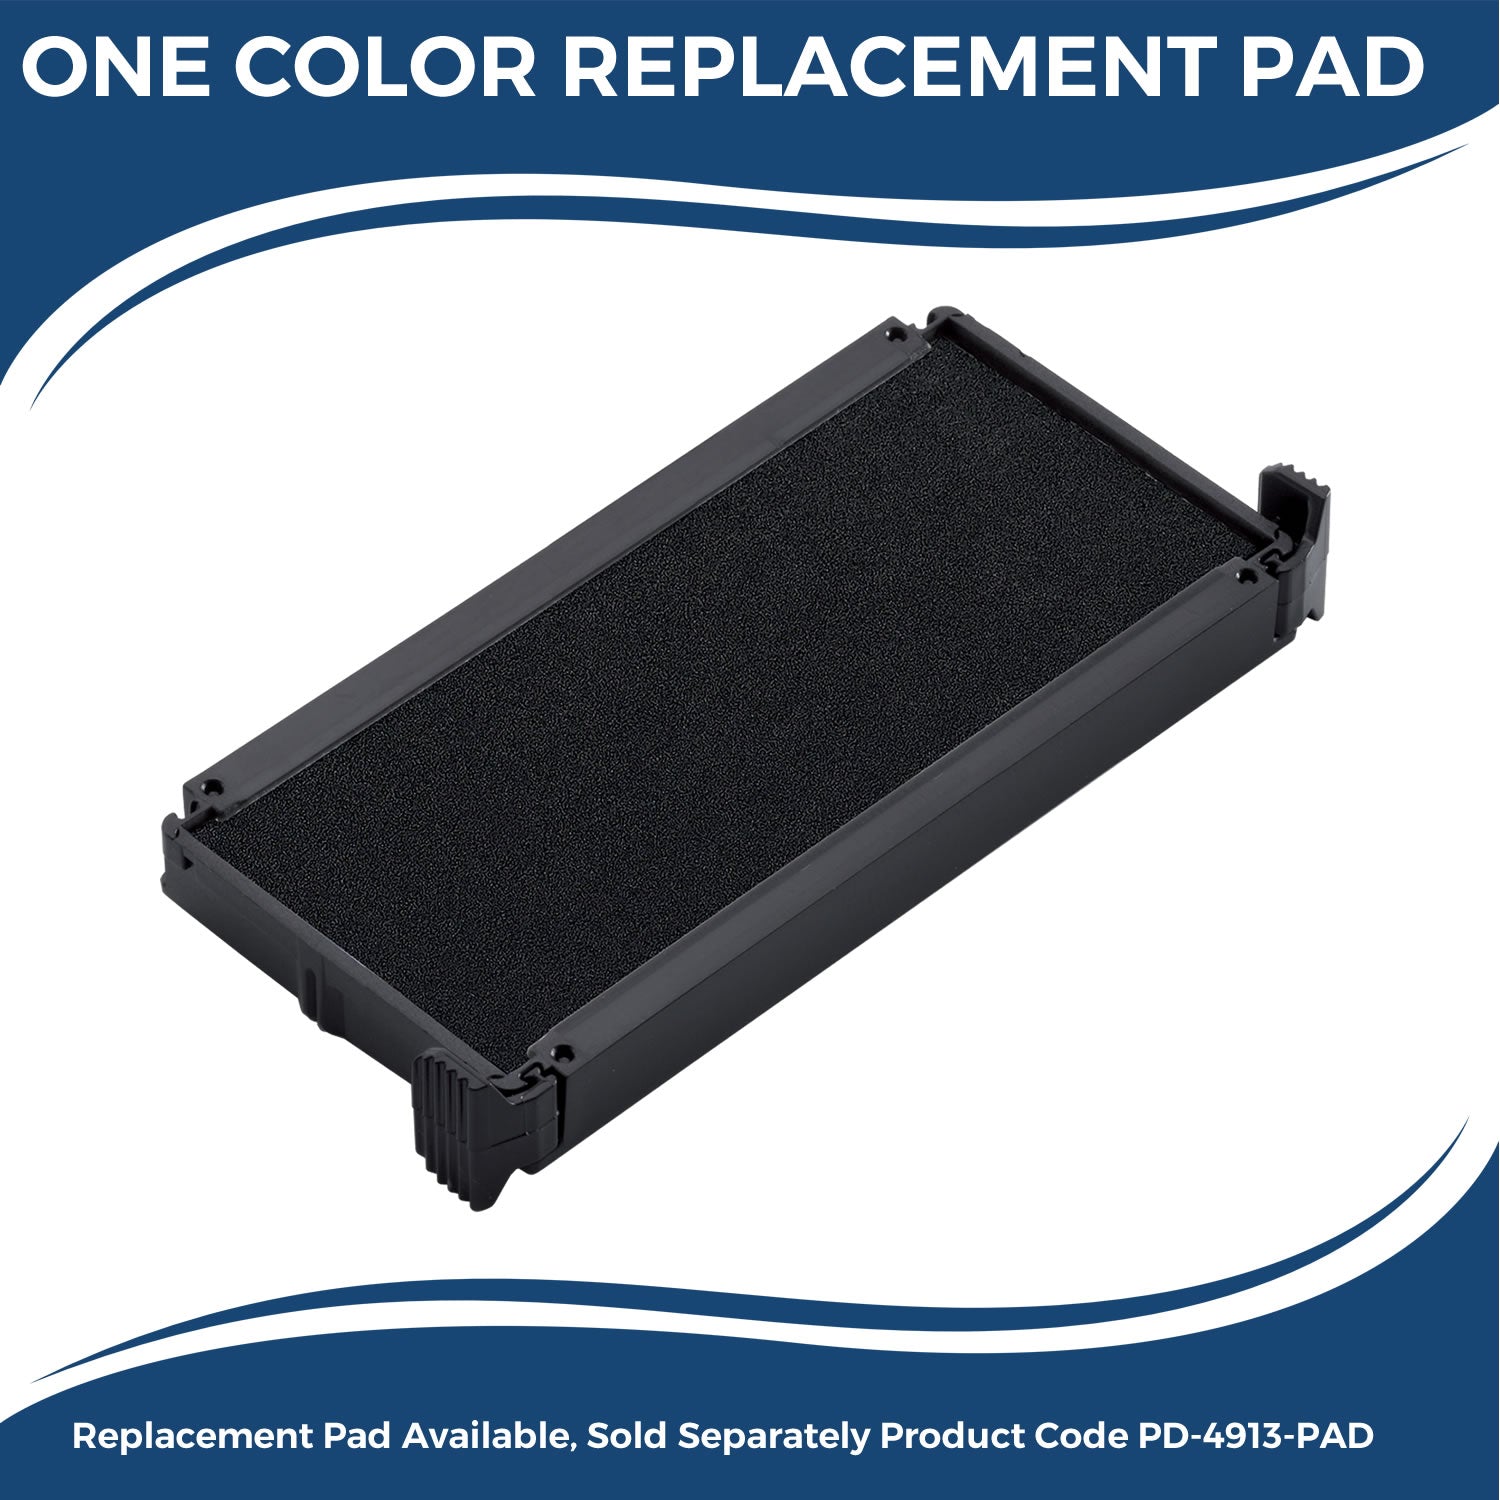 Large Self Inking Duplicate Stamp 4120S Large Replacment Pad